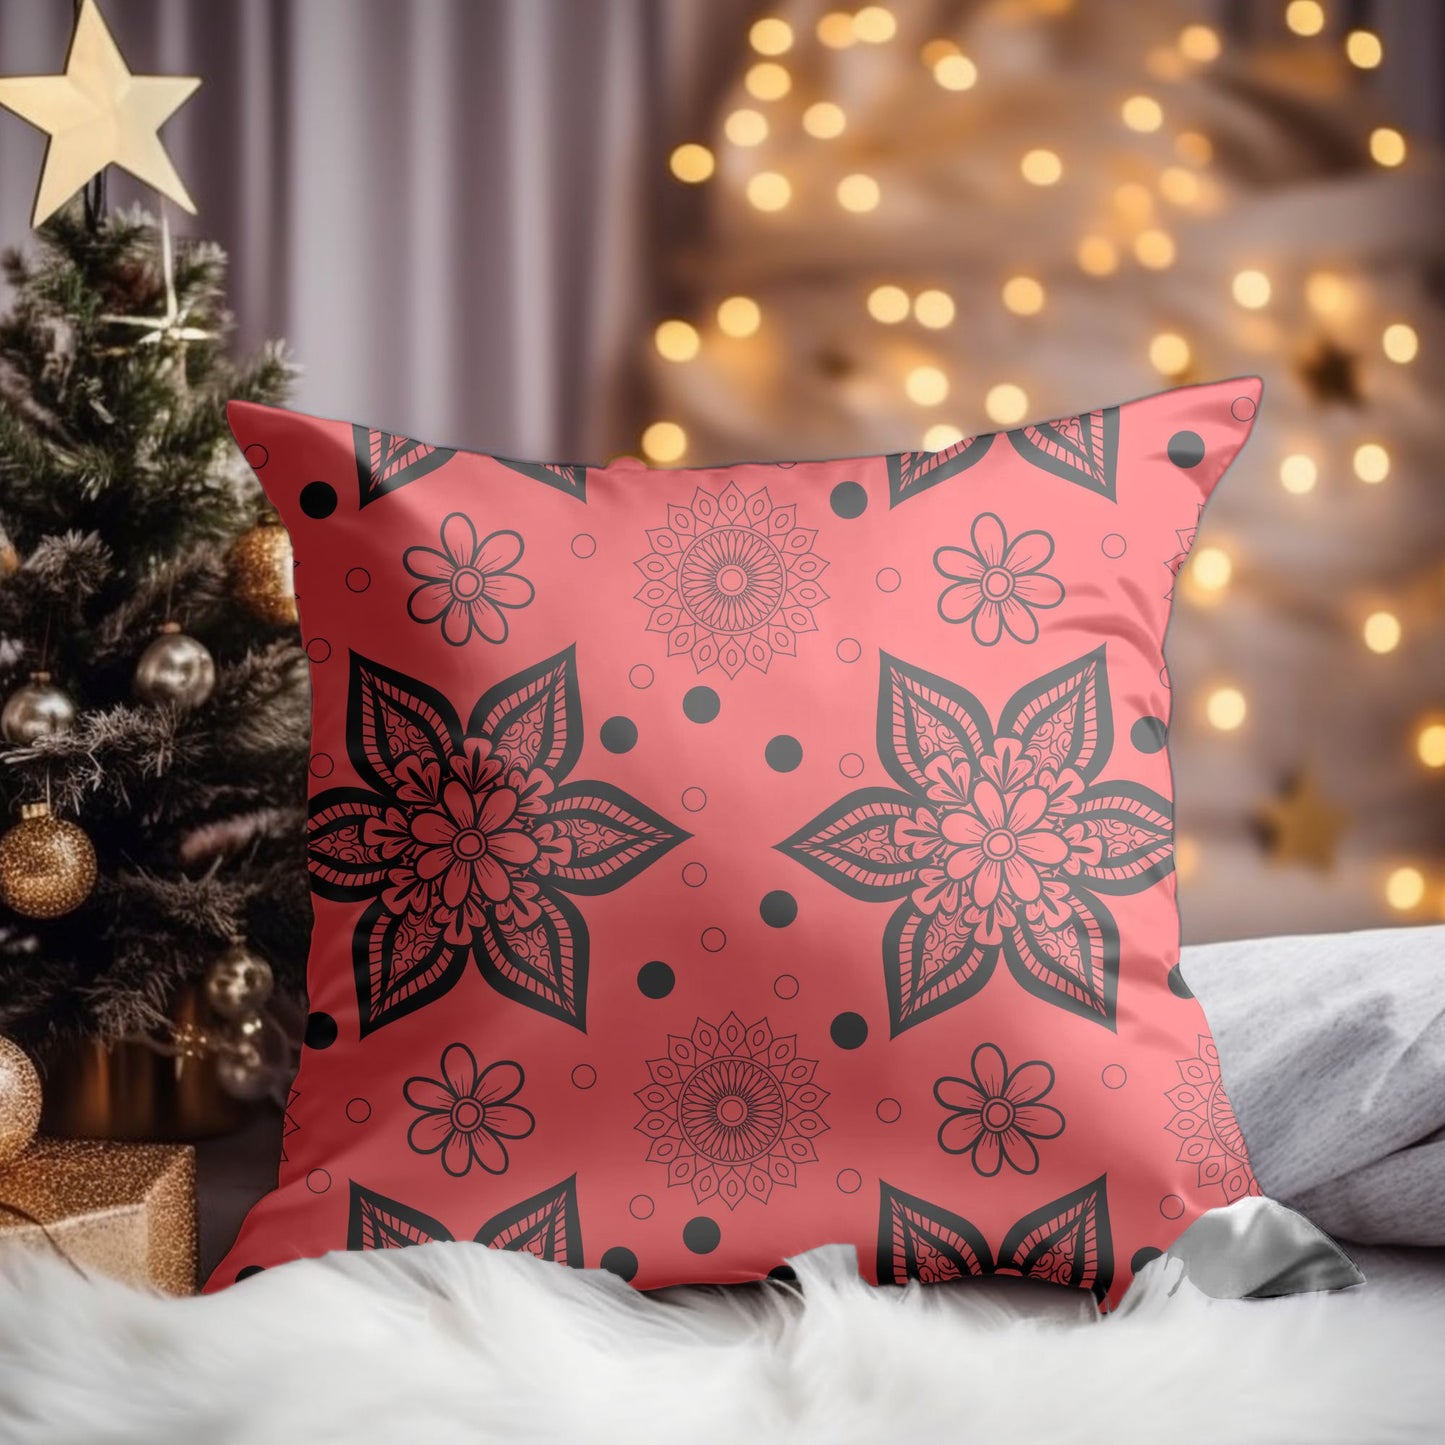 Classic Red and White Candy Cane Christmas Pillow